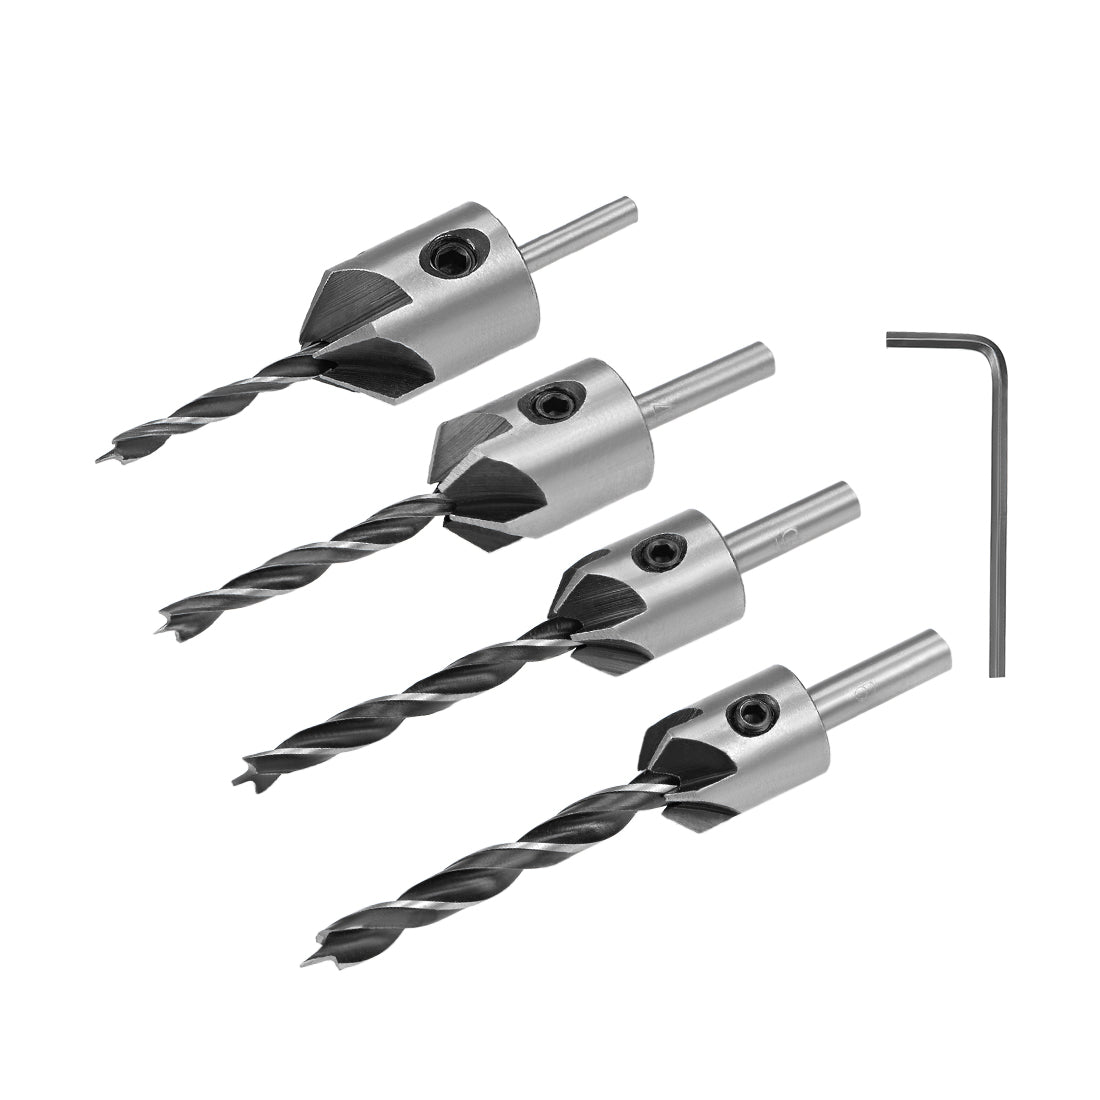 uxcell Uxcell Countersink Drill Bit Set, Quick Change Drill Bit with One Hex Key, Adjustable Carpentry Reamer Plated for Wood DIY, 4 Pcs (3mm, 4mm, 5mm, 6mm)